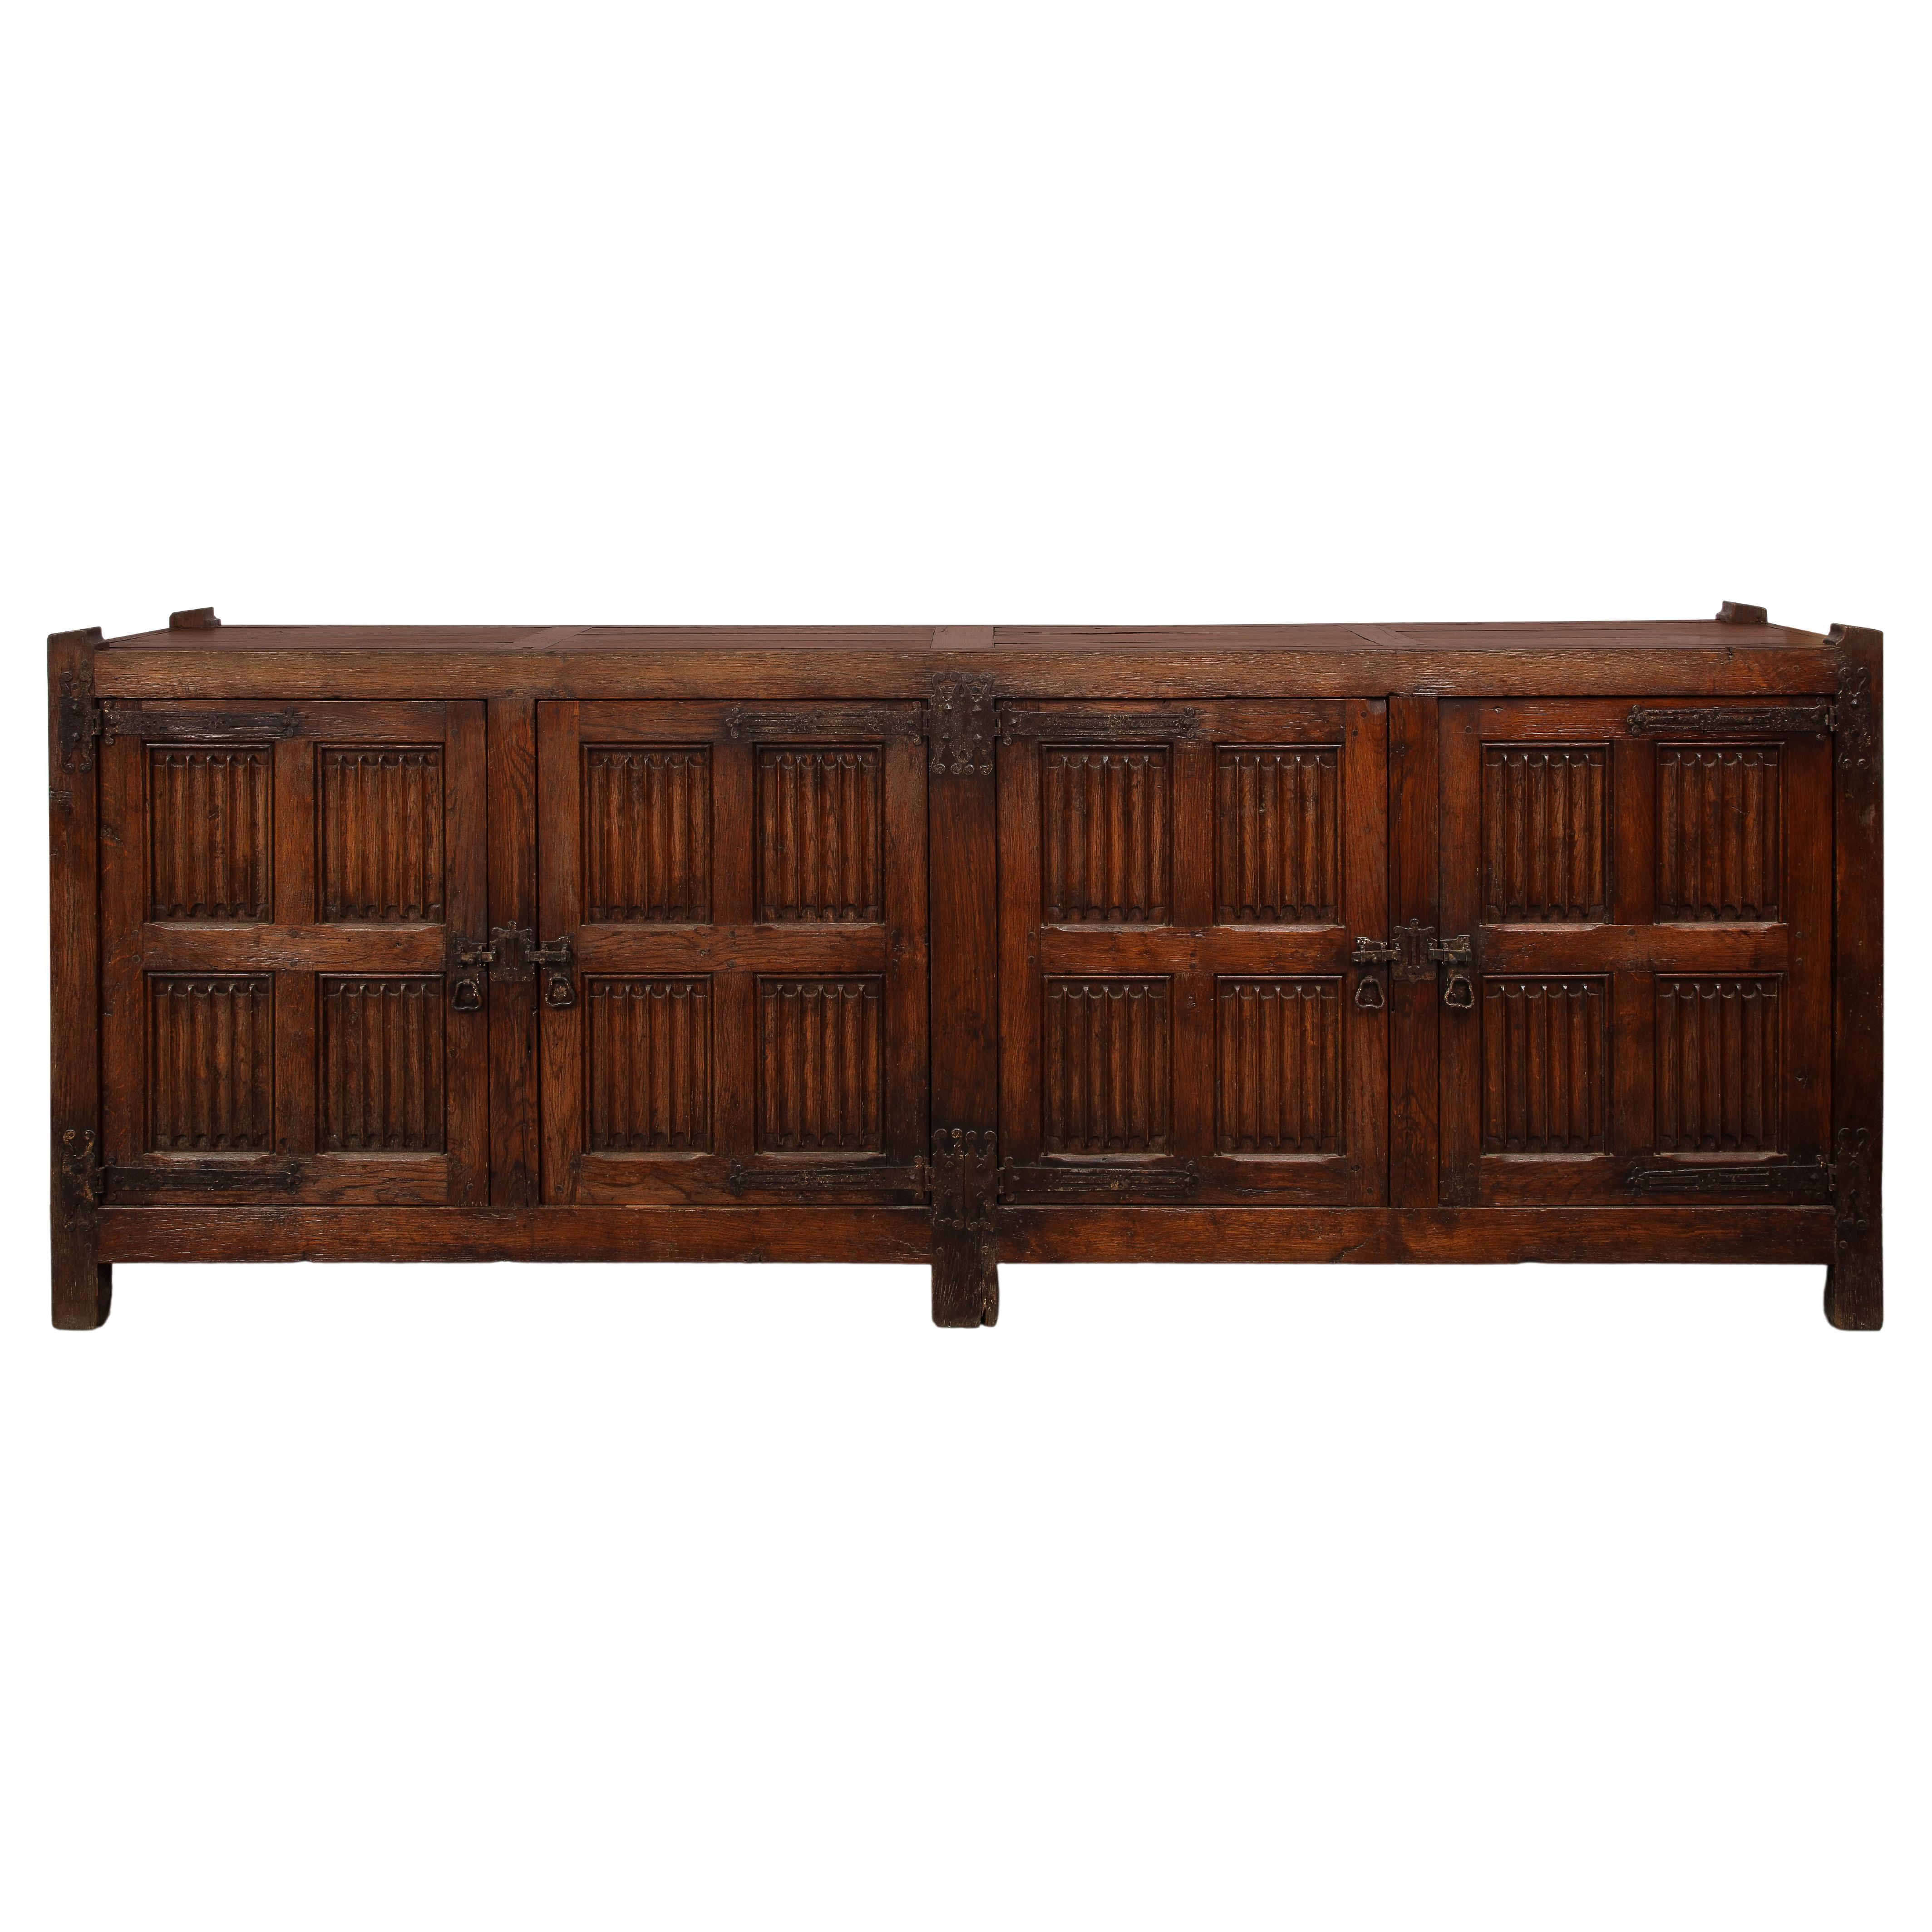 19th C. Hand Carved Oak Sideboard with Shelves/Drawers, Nunnery, France For Sale